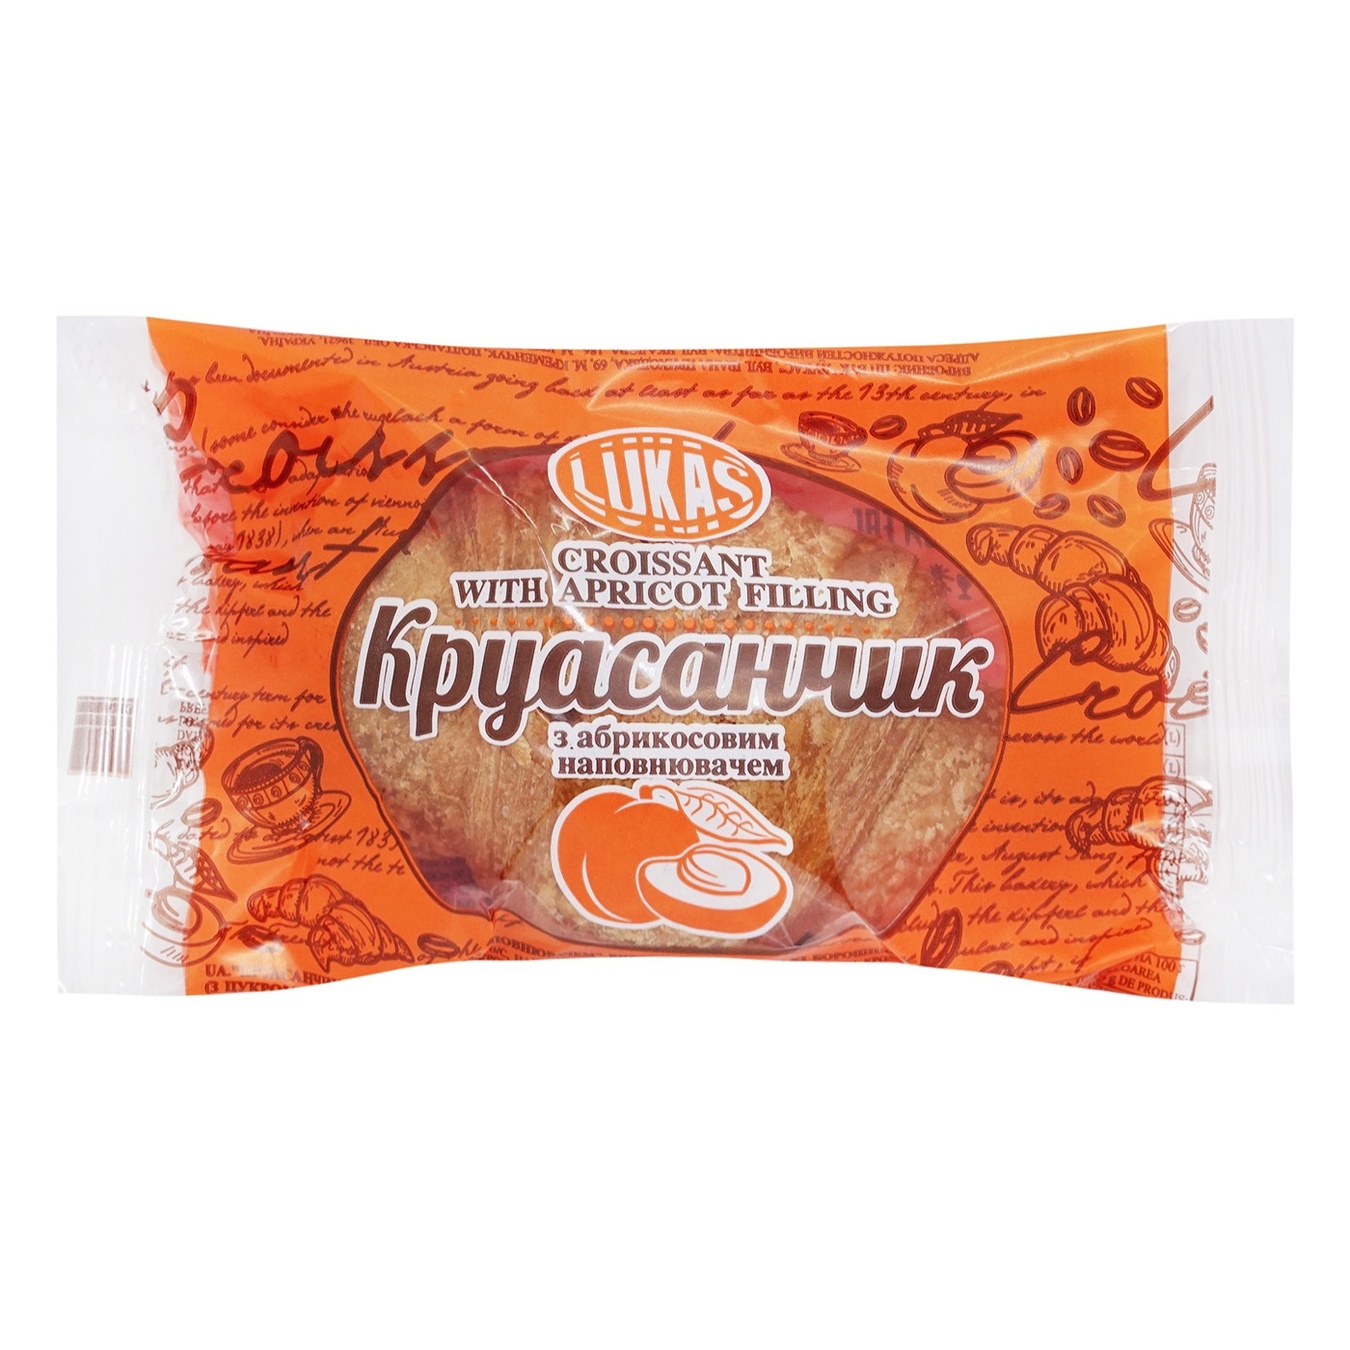 Croissant Lucas apricot weight